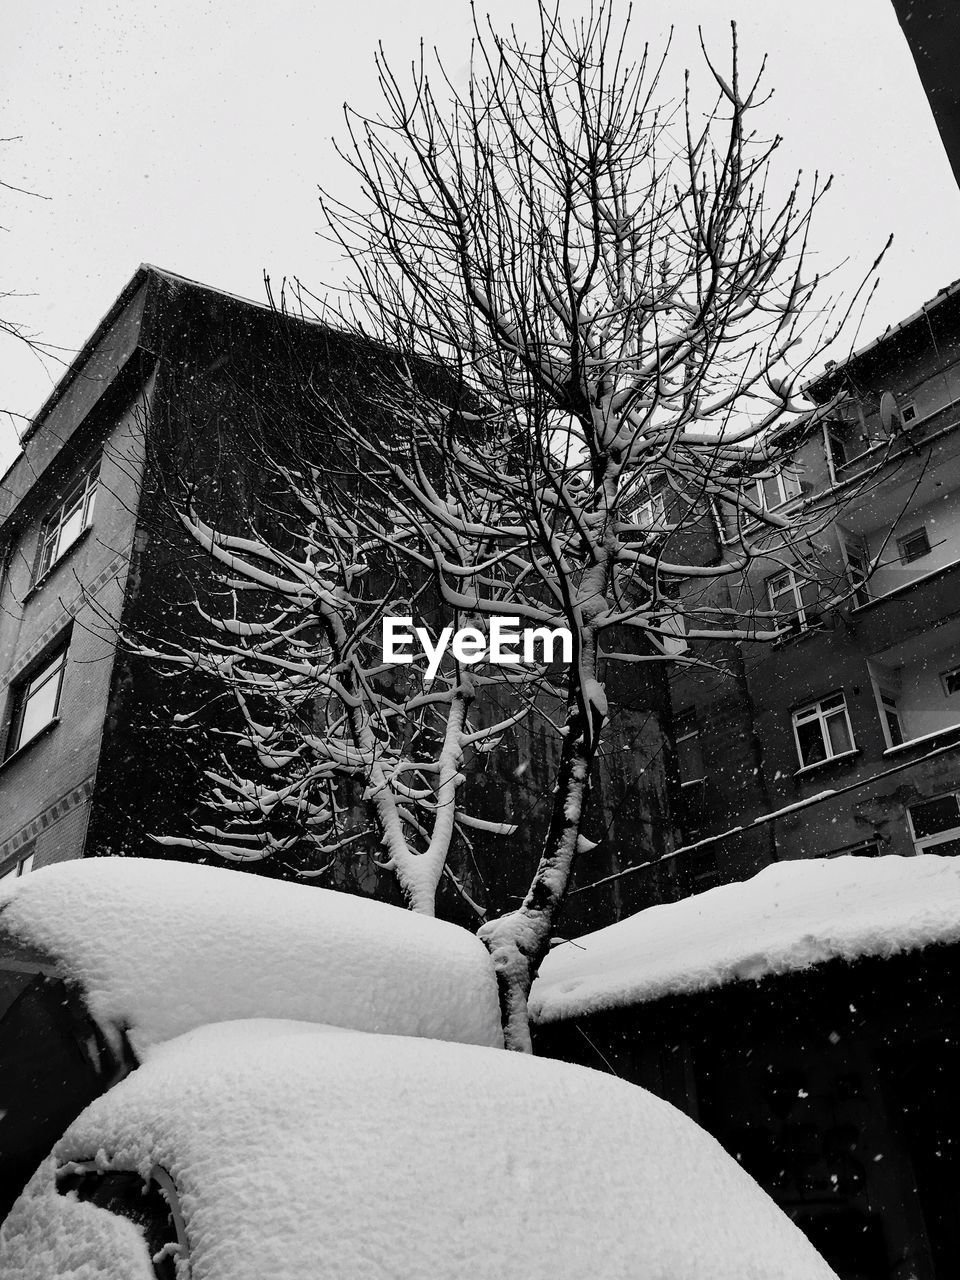 BARE TREE AGAINST SNOW COVERED HOUSES